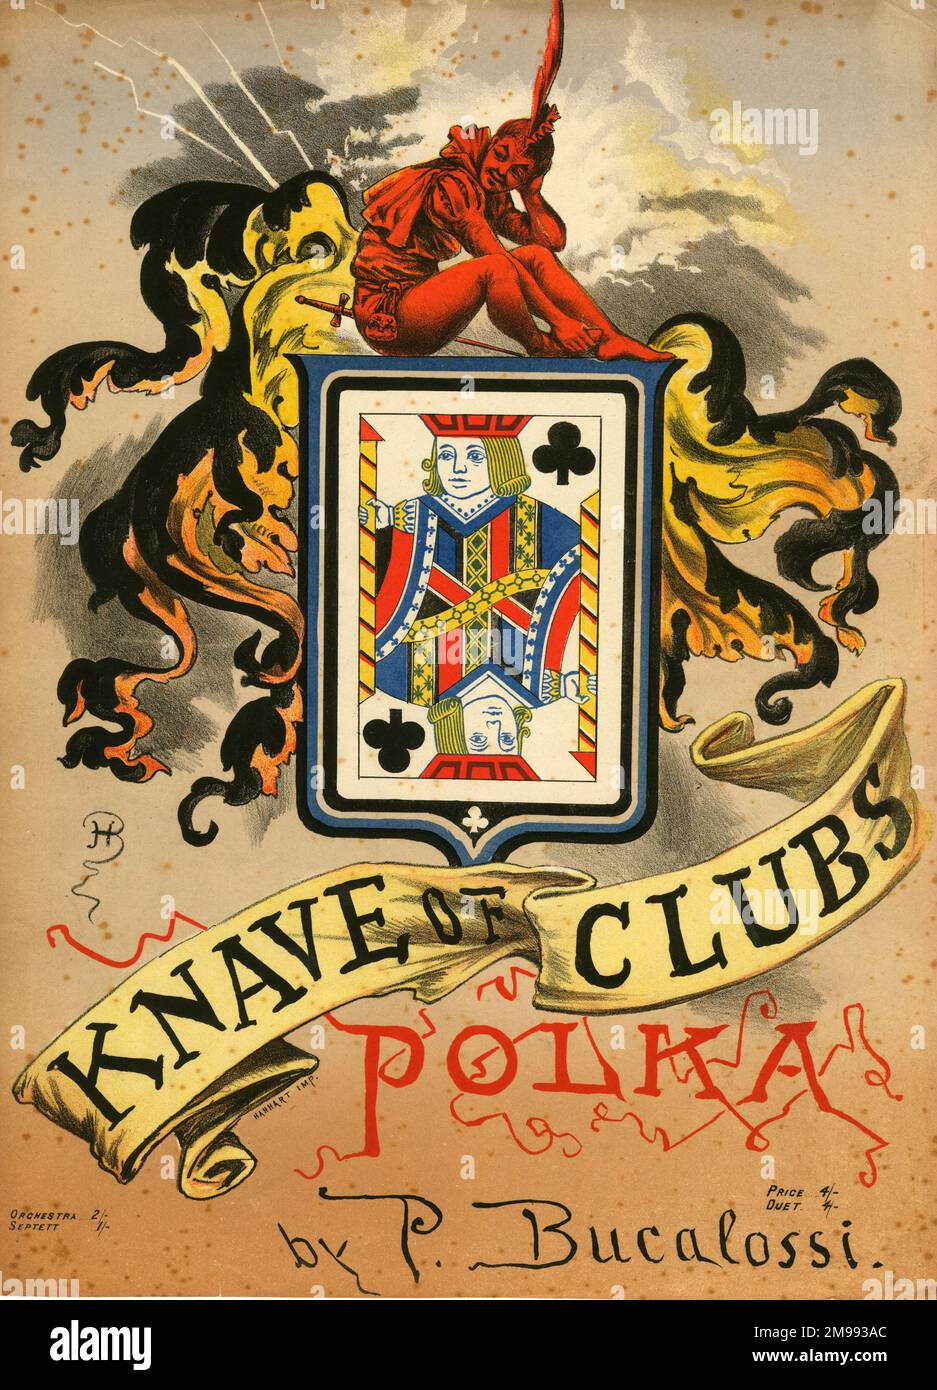 Music cover, Knave of Clubs Polka by P Bucalossi. Stock Photo